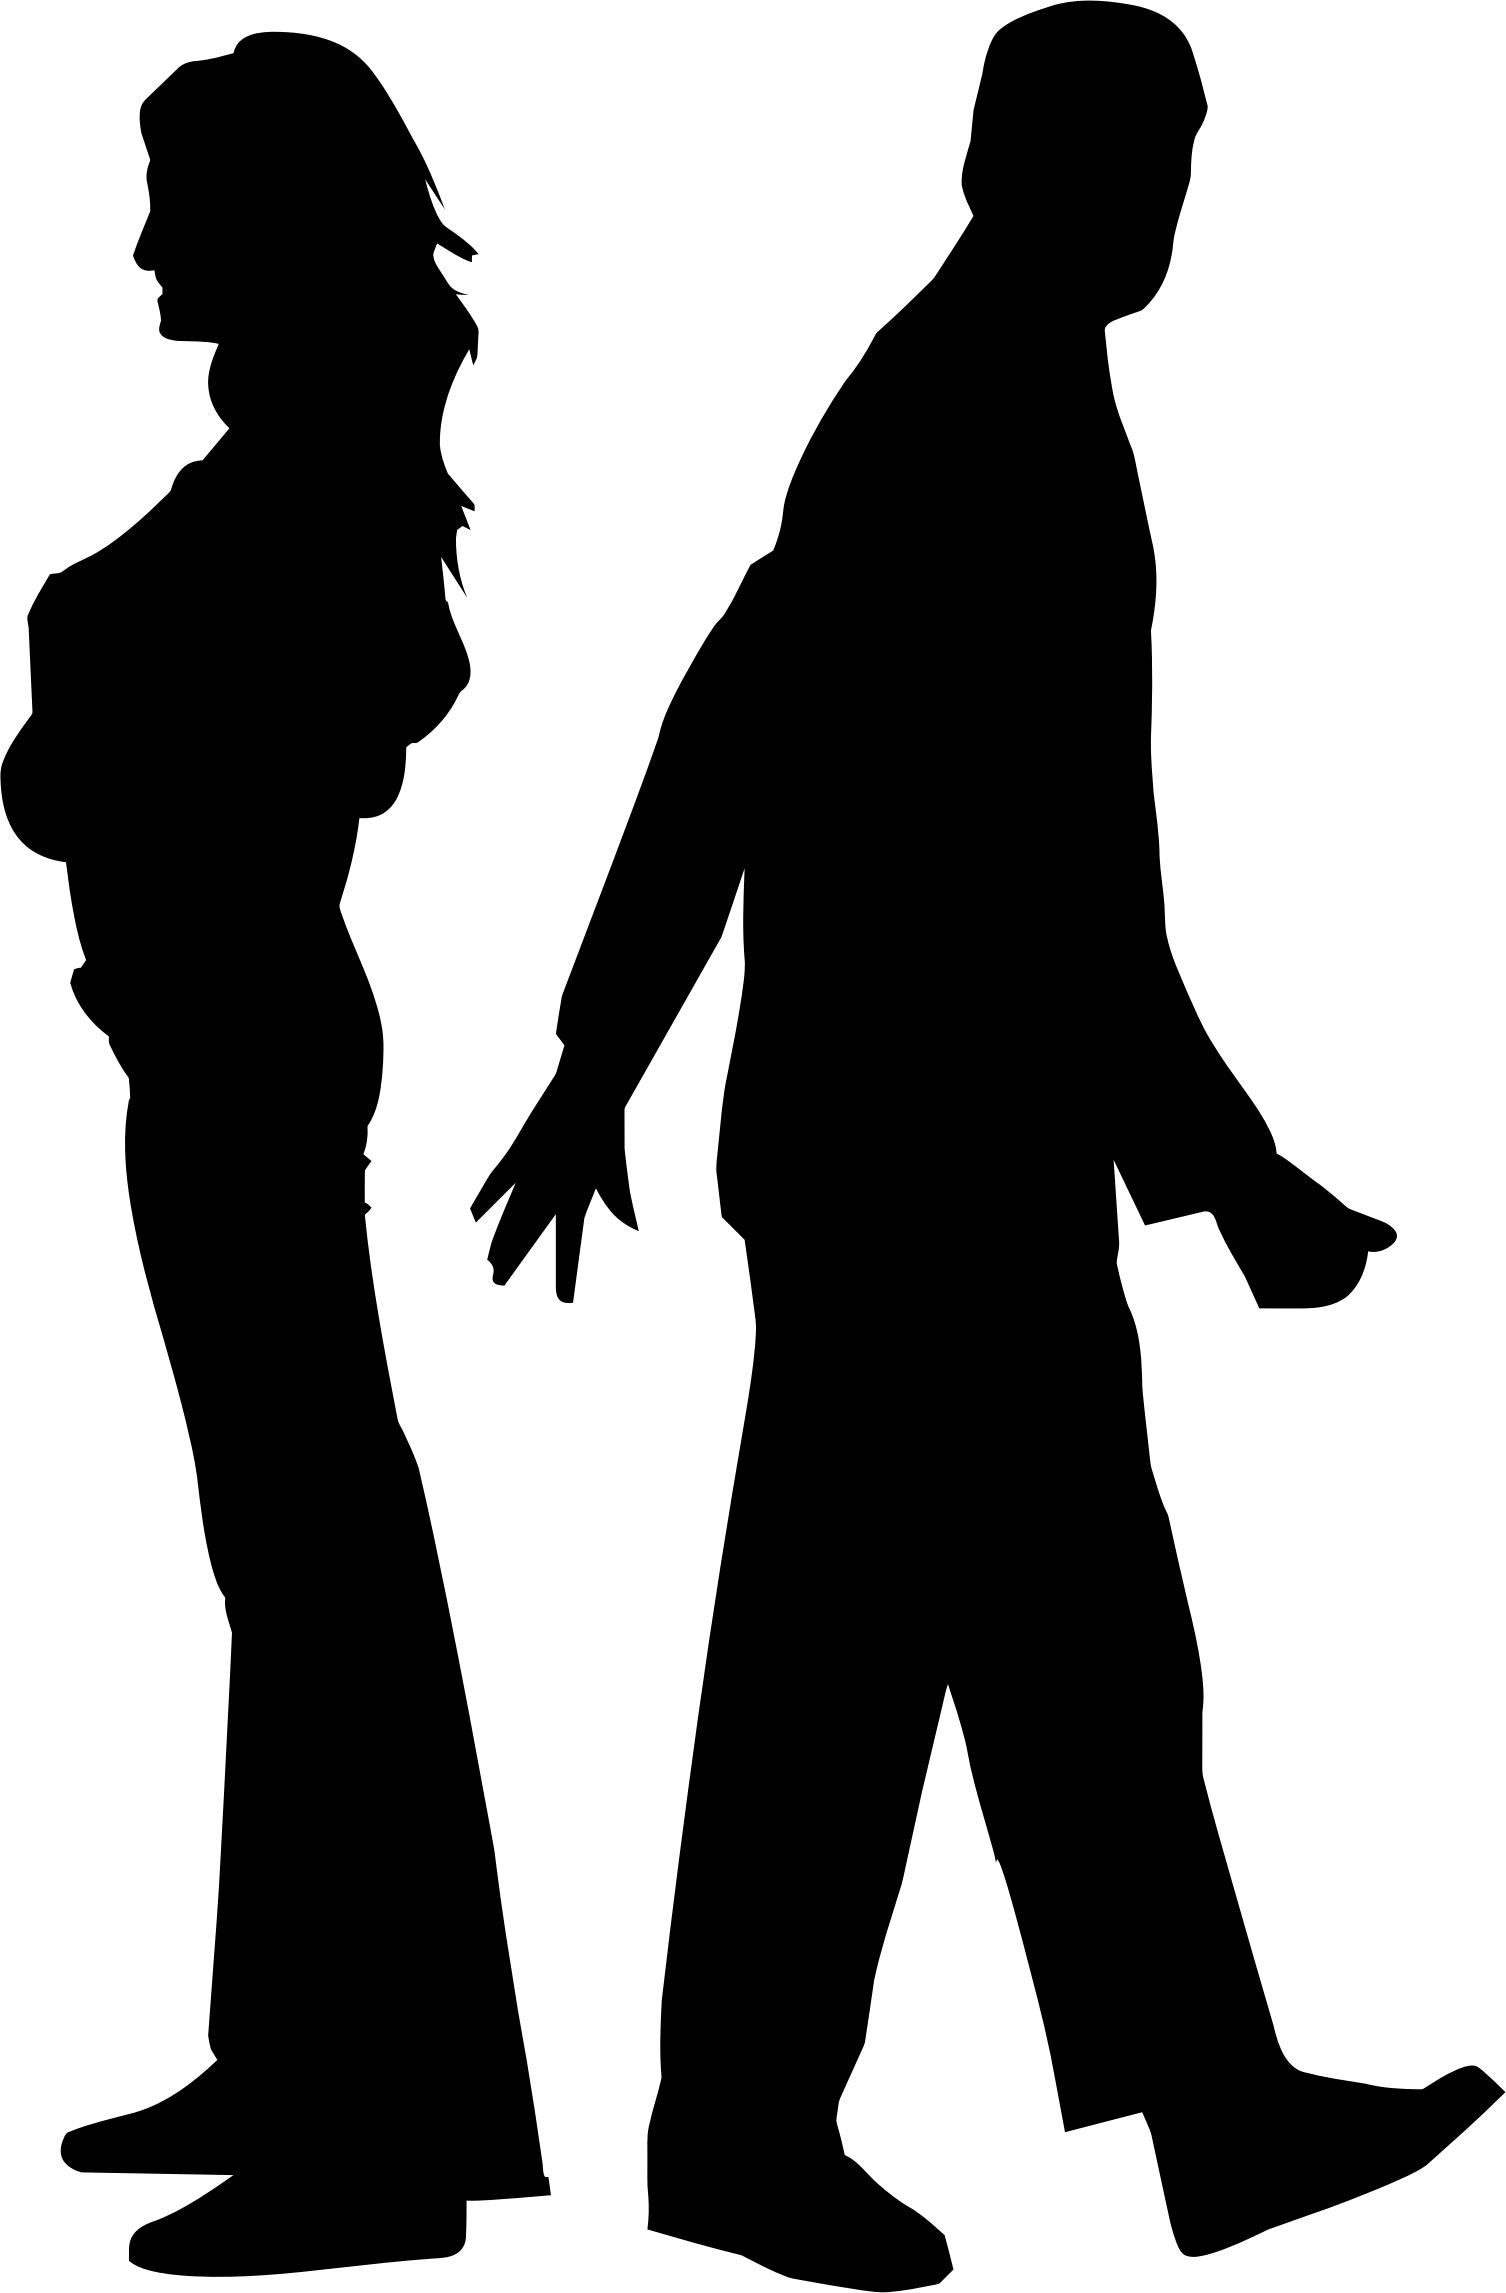 Fighting Couple Silhouette png